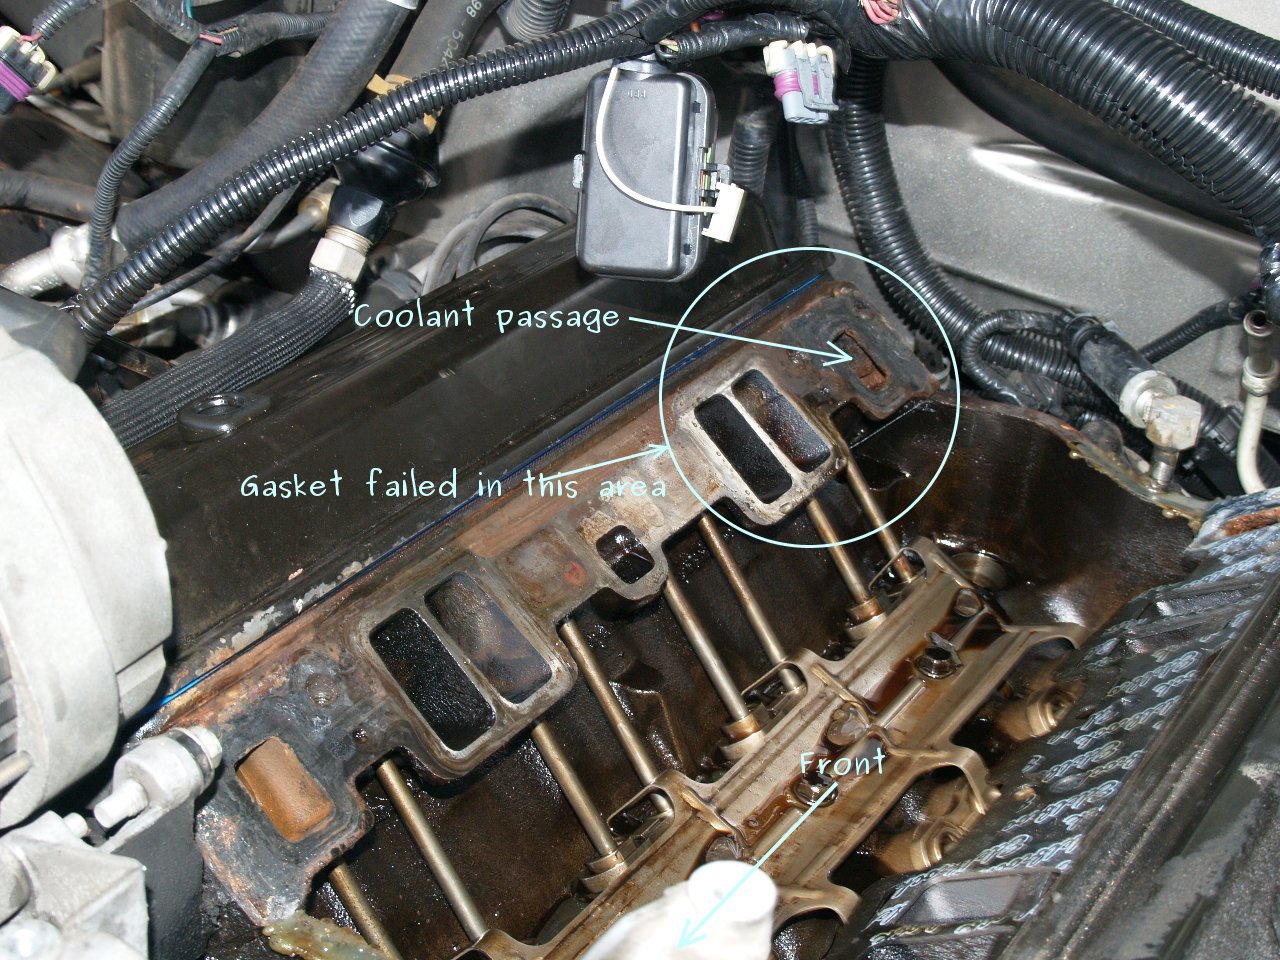 See P0717 in engine